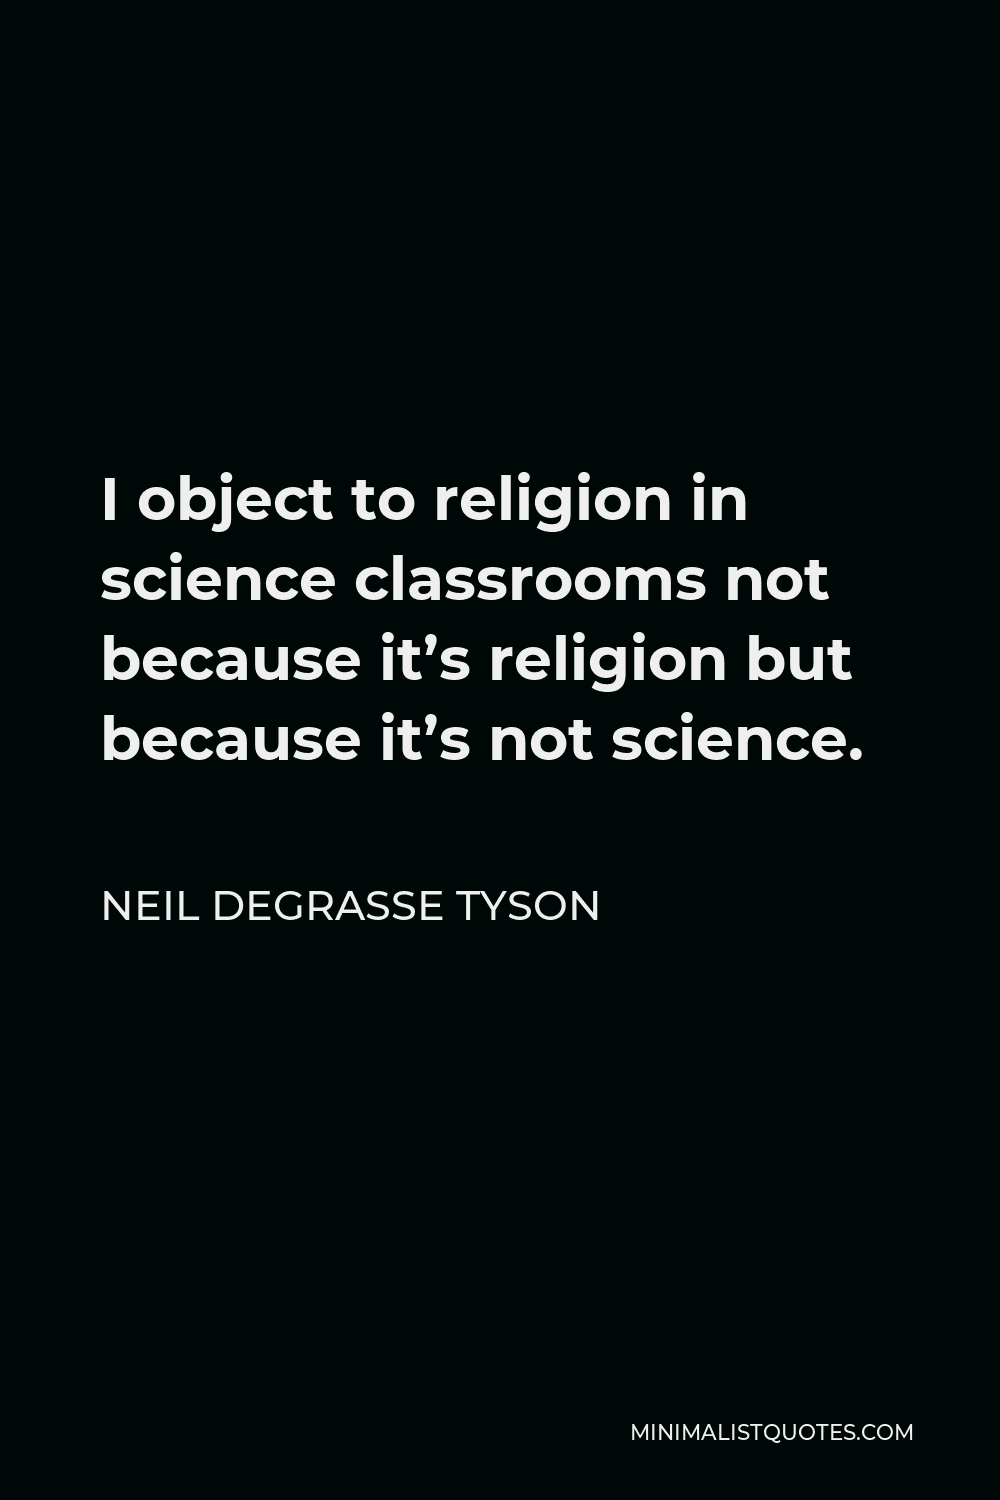 Neil deGrasse Tyson Quote - I object to religion in science classrooms not because it’s religion but because it’s not science.